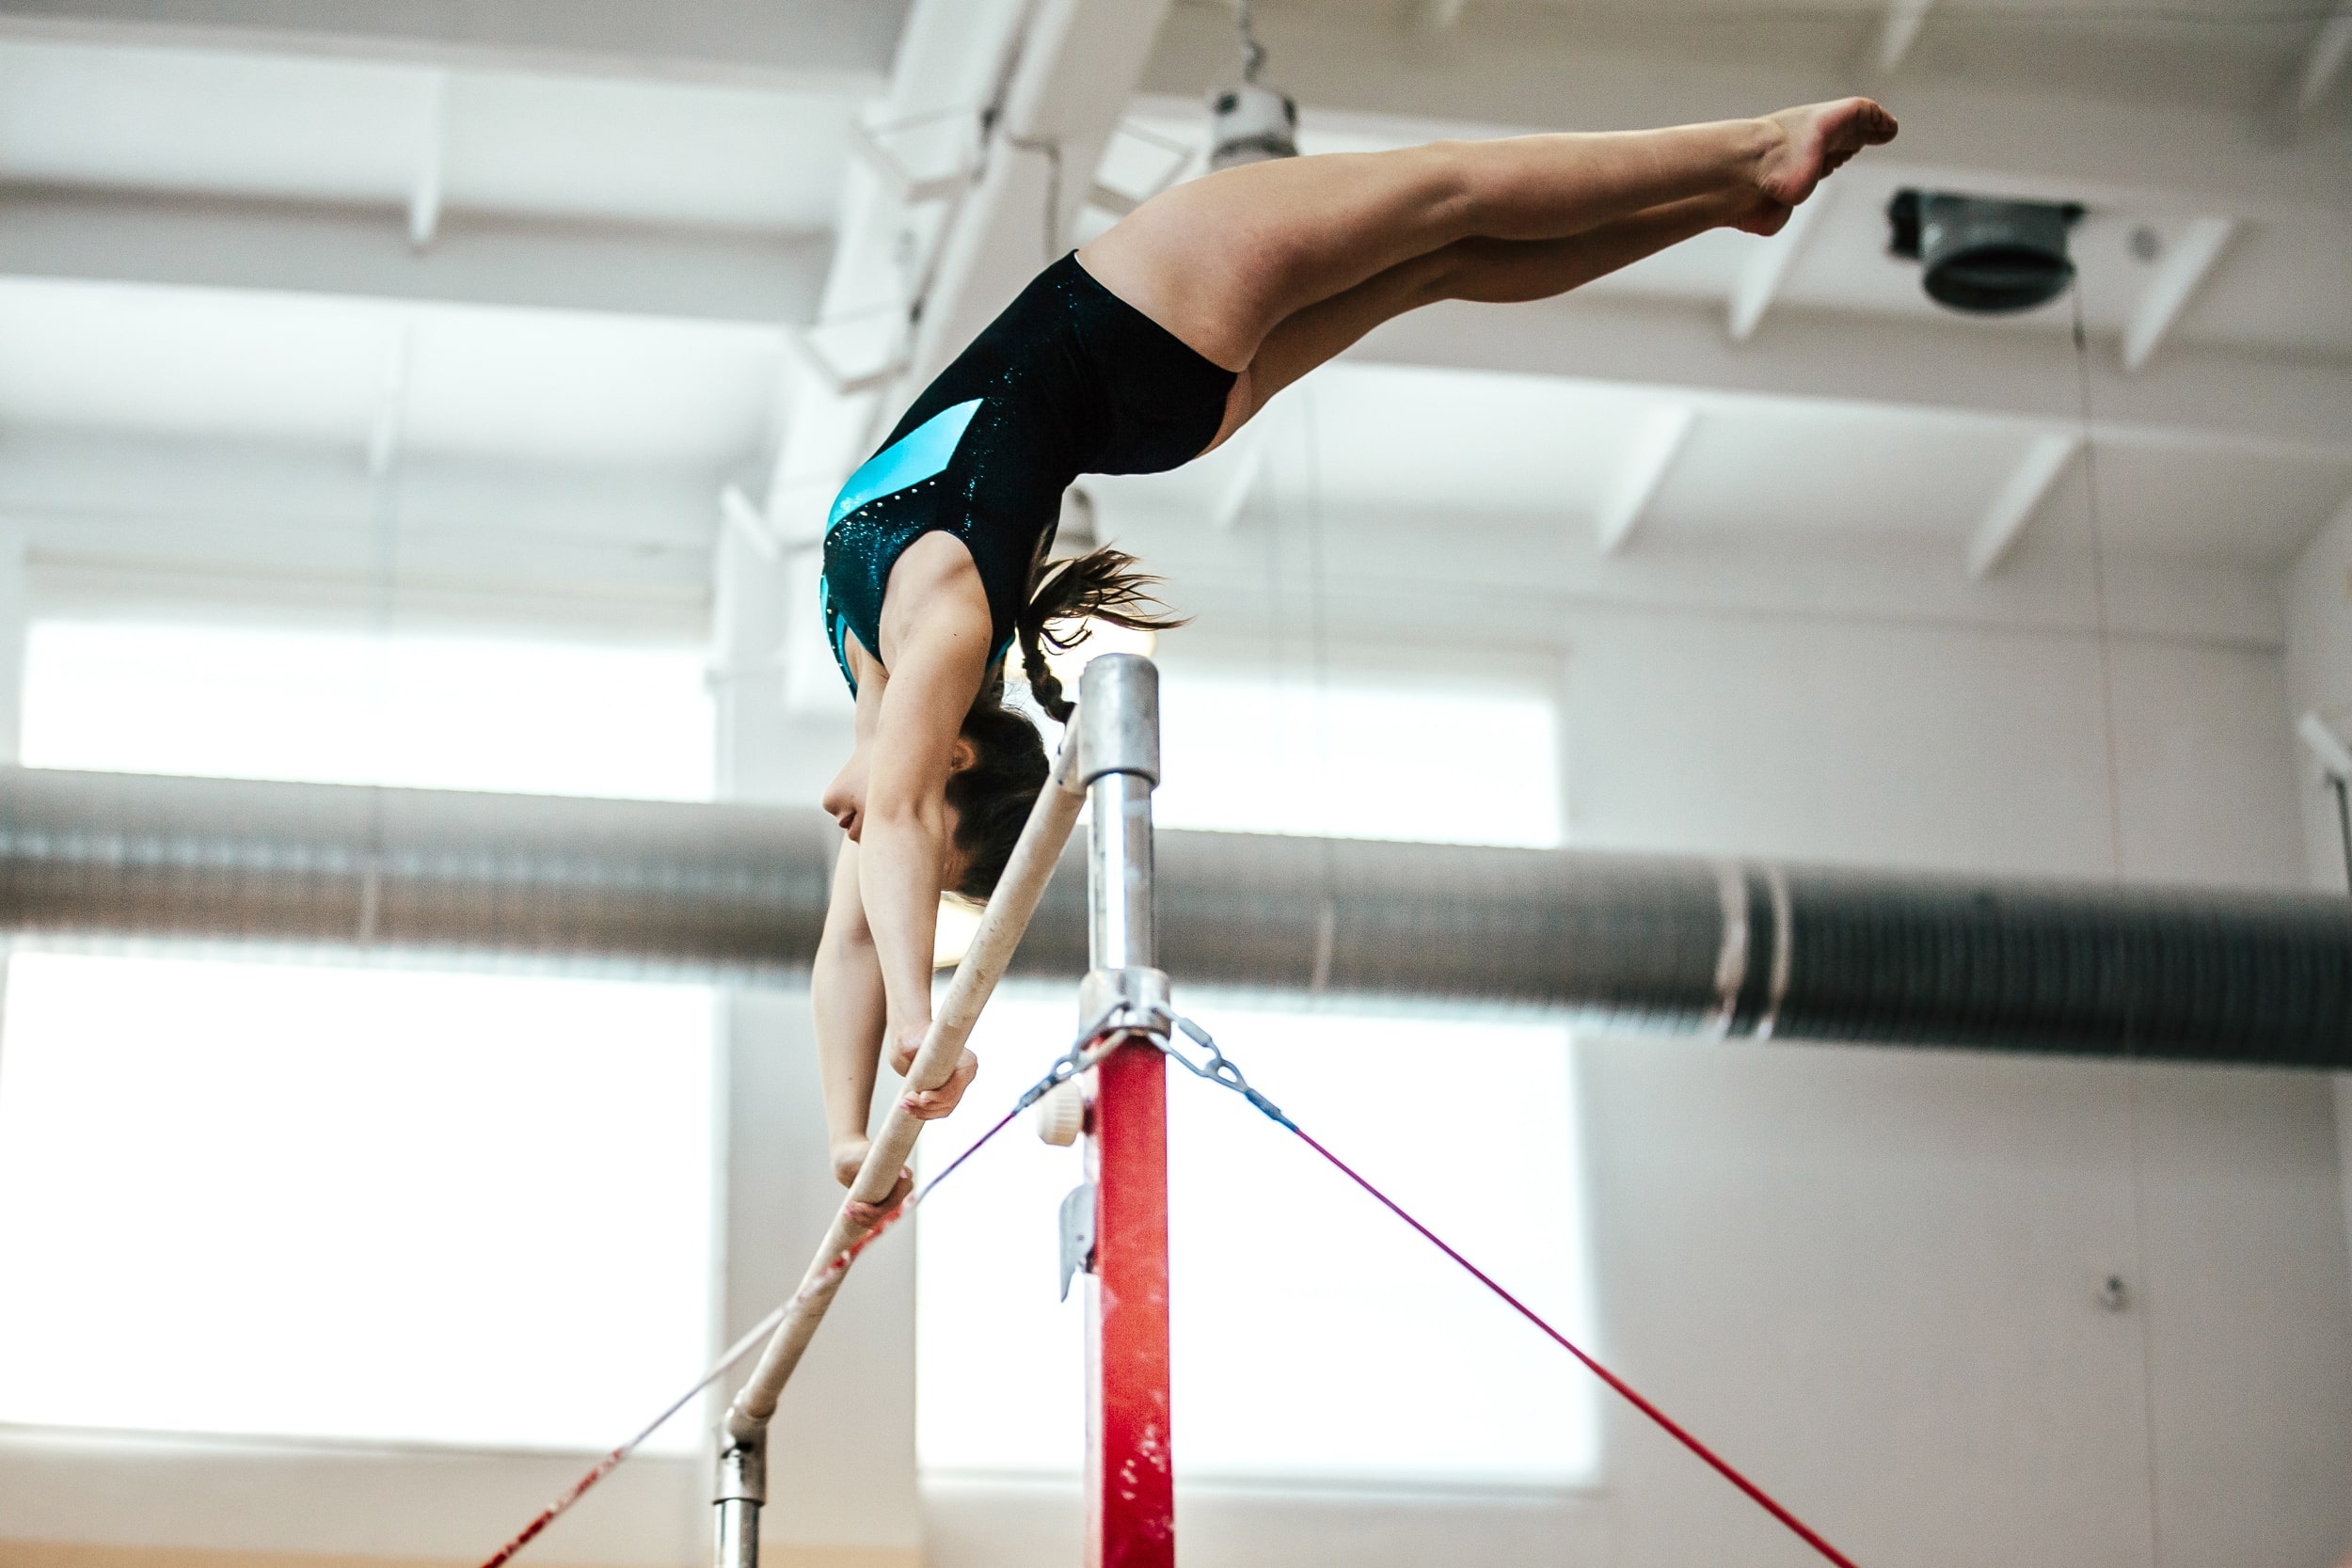 Uneven Bars: Gymnastics gym, UB, The gymnast's transition from bar to bar. 2500x1670 HD Wallpaper.